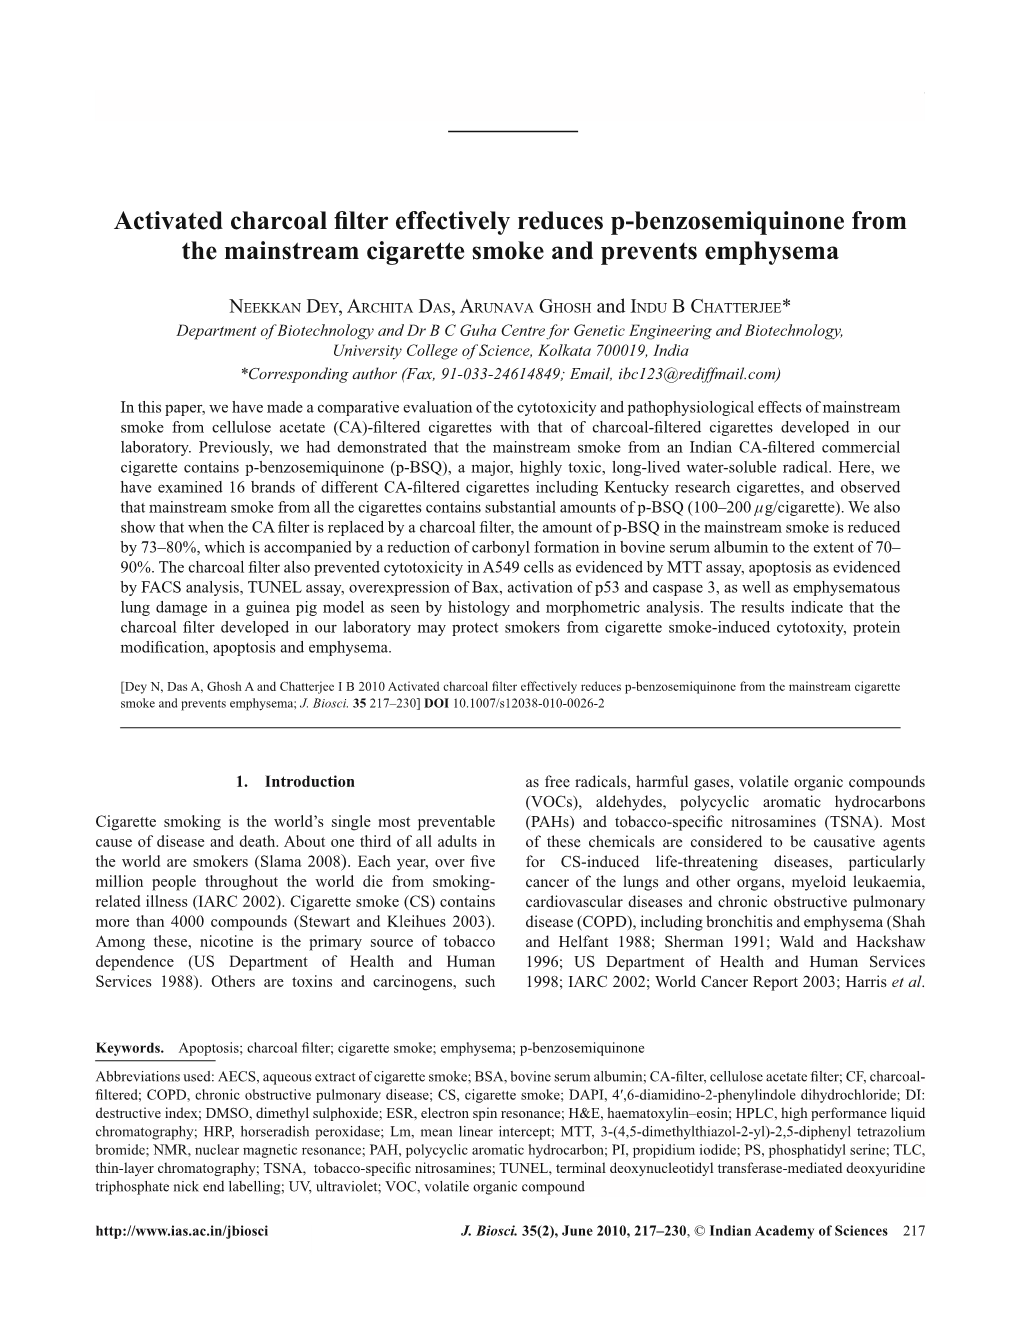 Activated Charcoal Filter Effectively Reduces P-Benzosemiquinone From